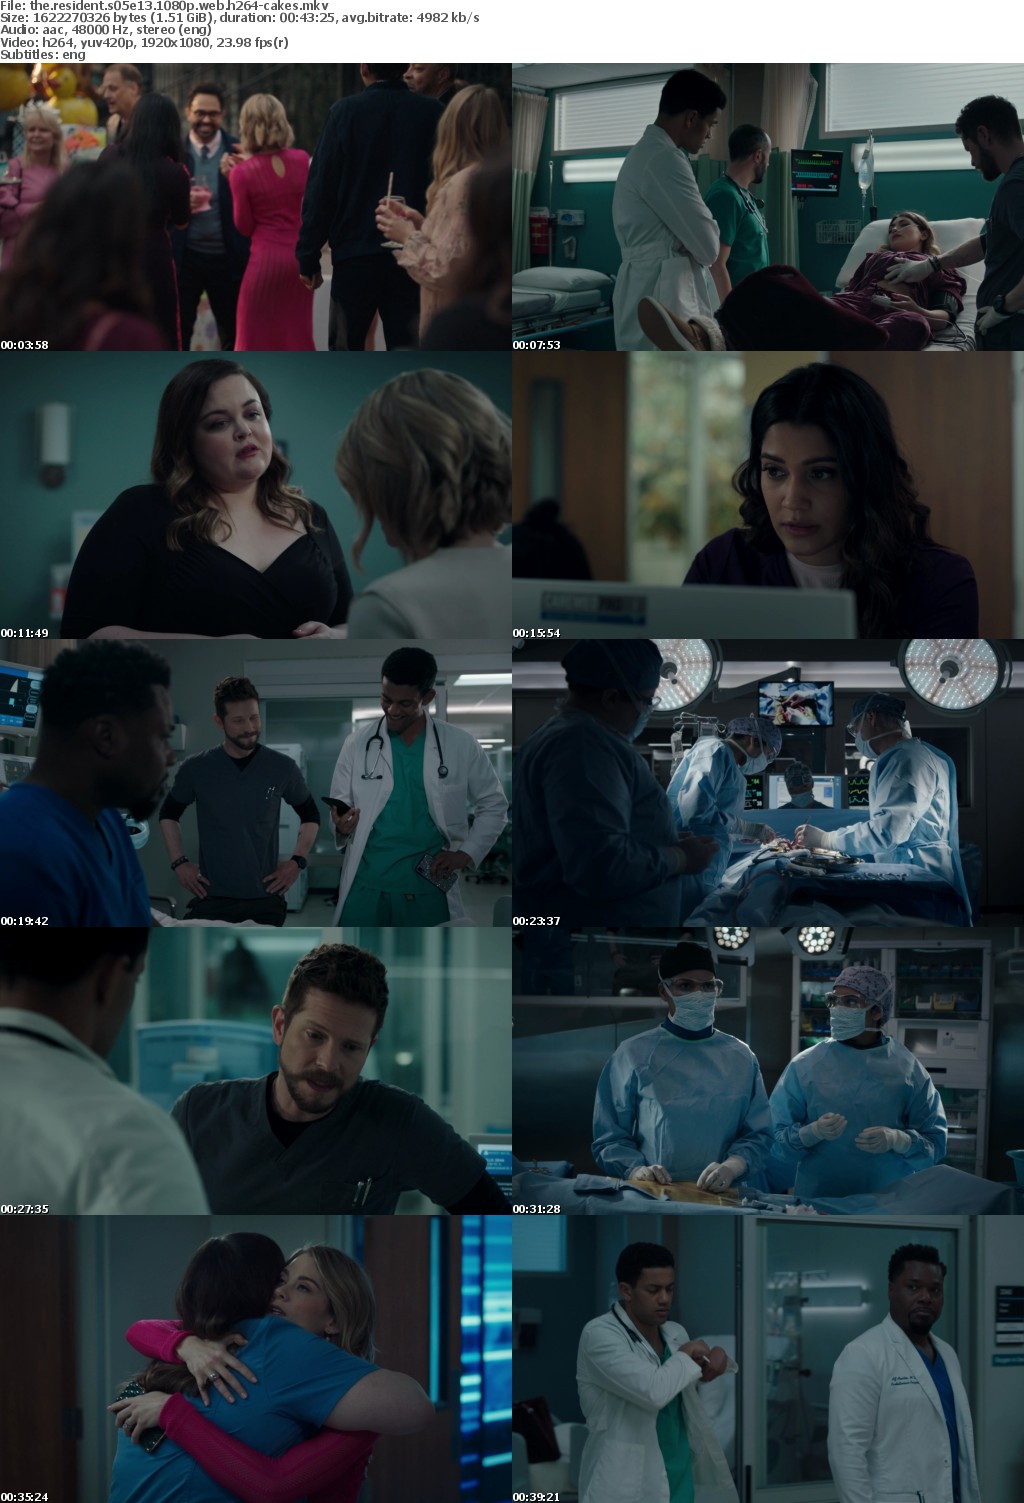 The Resident S05E13 1080p WEB H264-CAKES